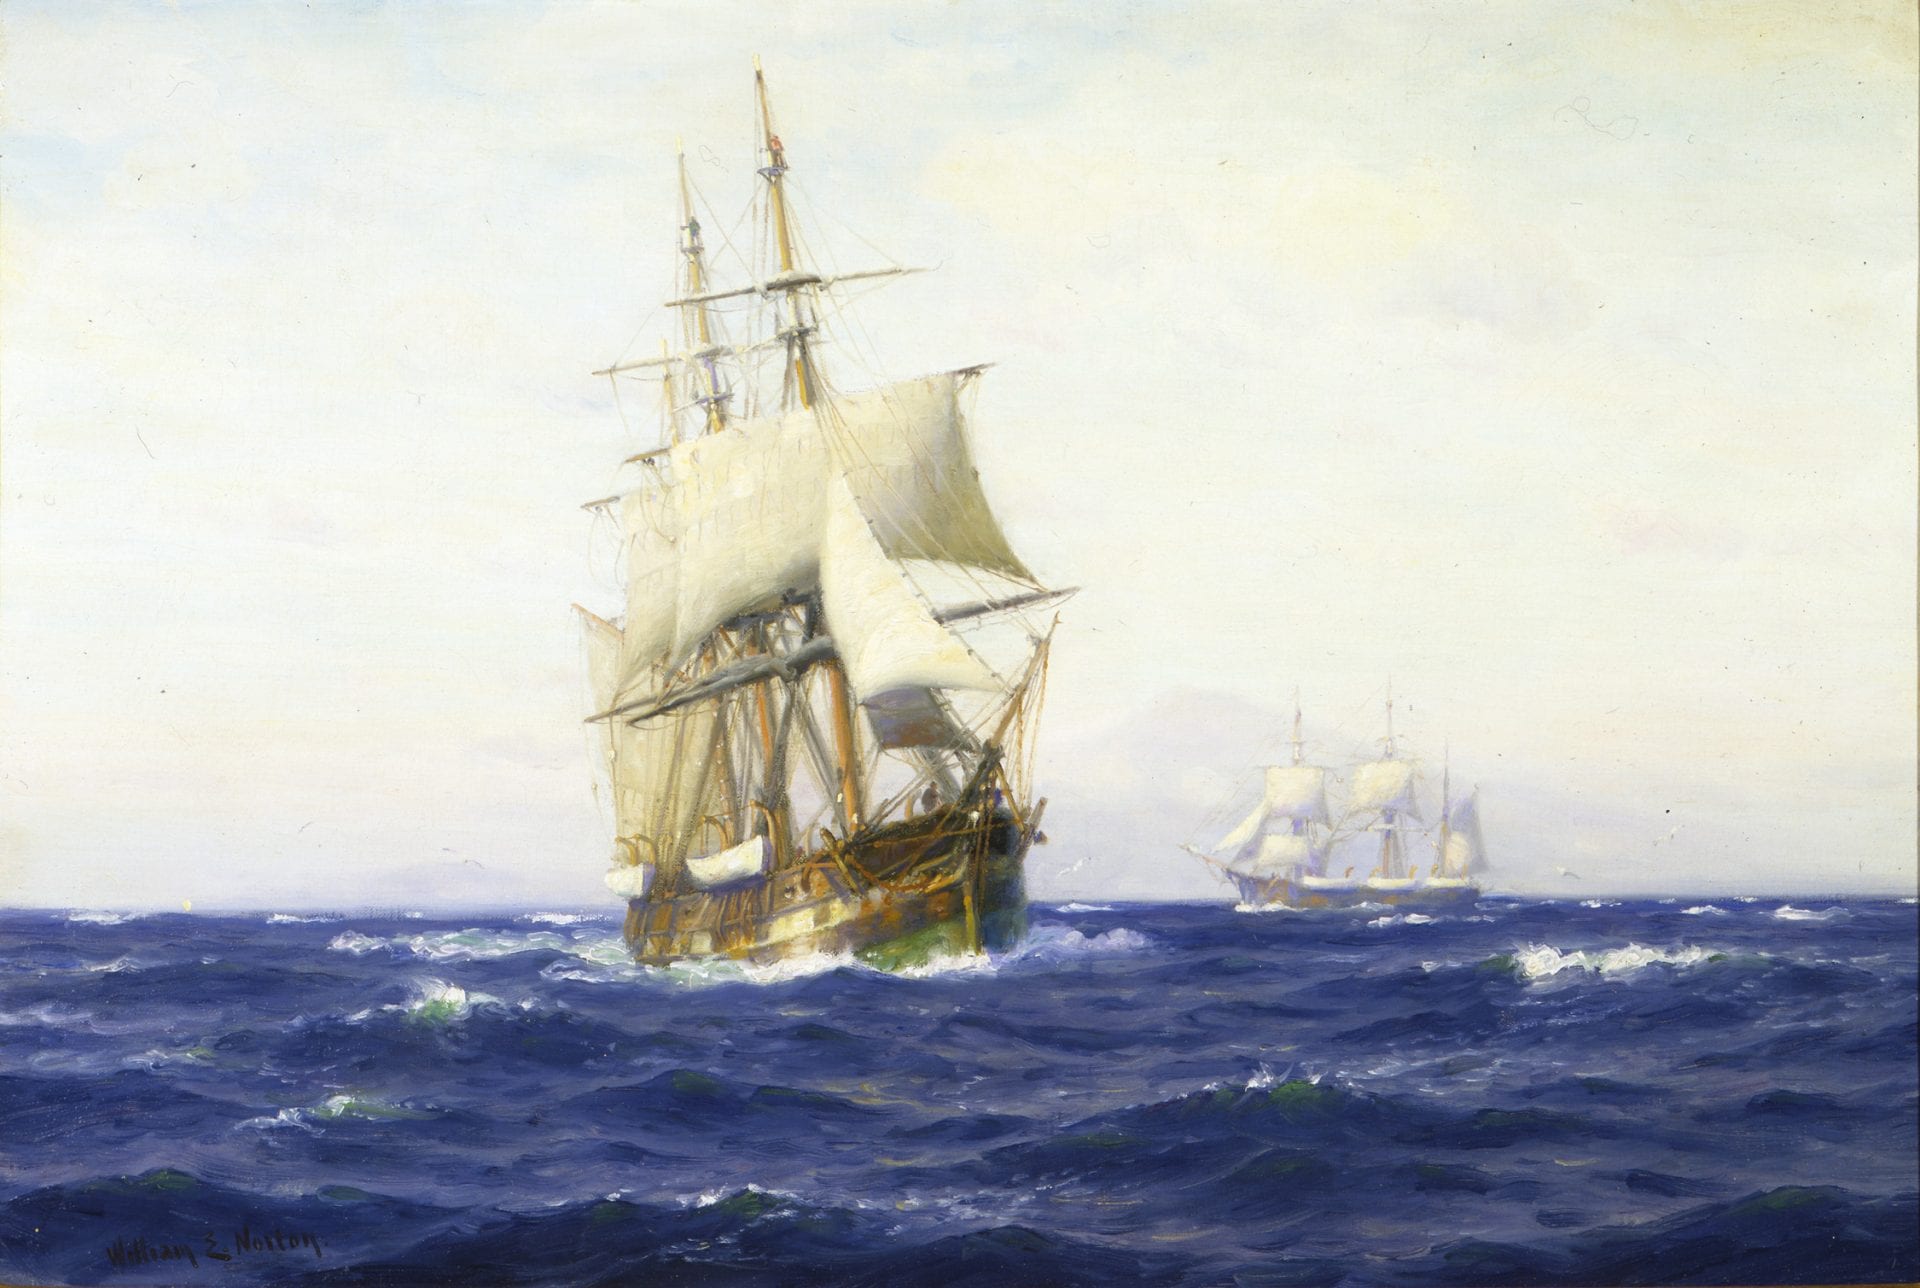 William Edward Norton, South Sea Whaling. Oil on canvas, date unknown. 2001.100.4743